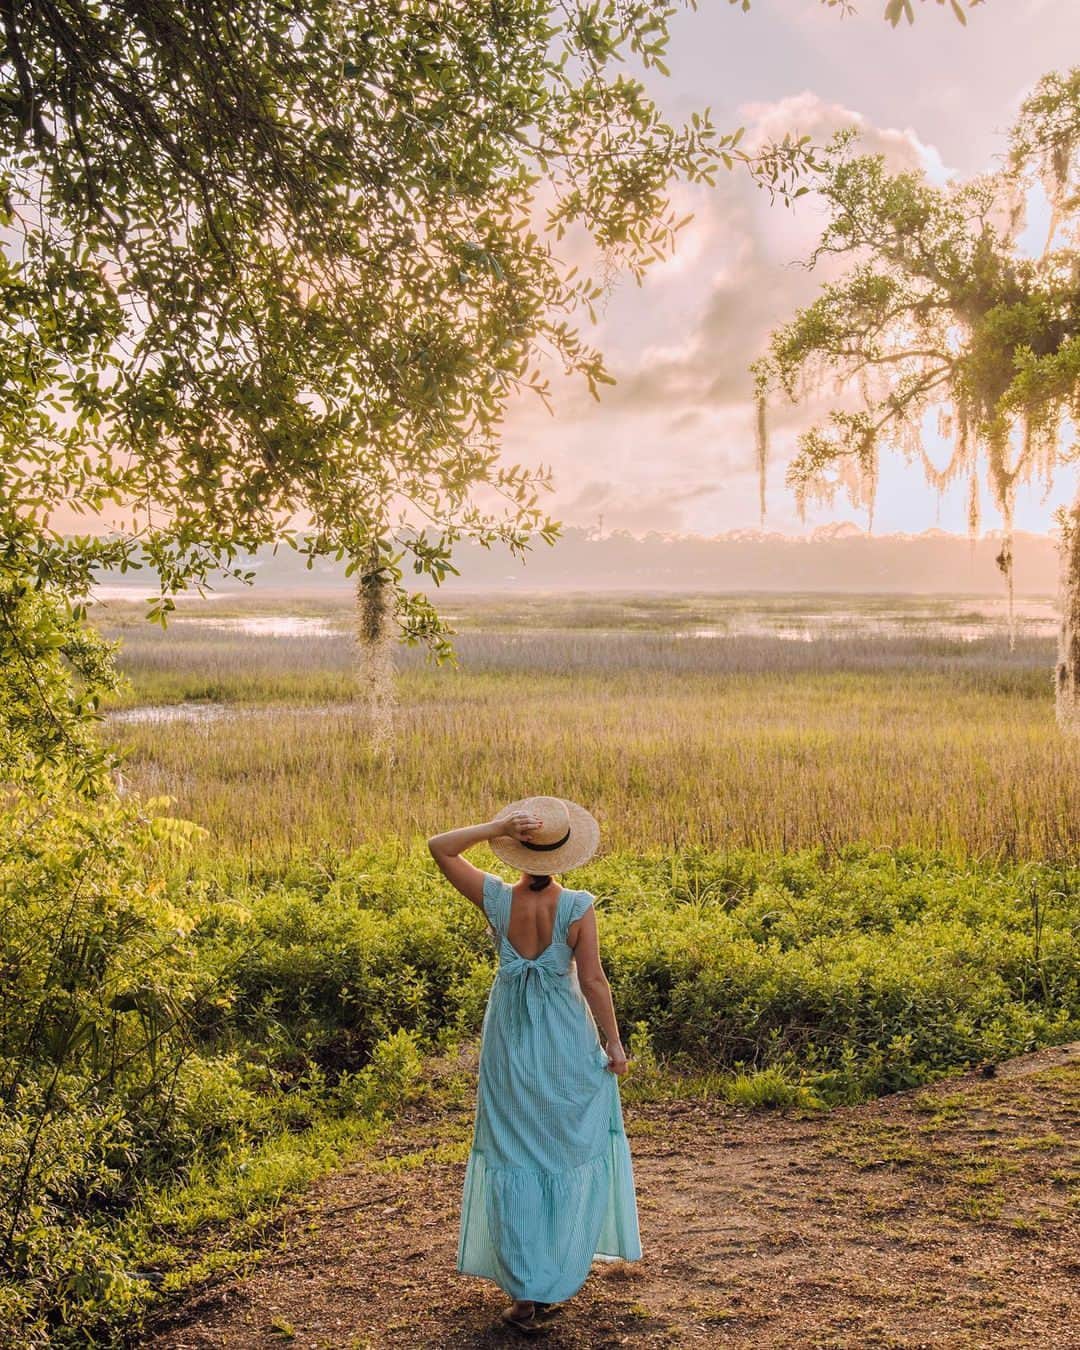 Visit The USAのインスタグラム：「Let these photos of Beaufort, South Carolina answer your question of “where to next?” 😉  Escape to this picturesque coastal town—that you might have already seen in world-famous movies like Forrest Gump—and save this essential itinerary for your trip: ☑️Explore the 19th-century Hunting Island lighthouse at Hunting Island State Park ☑️Take a stroll through the Downtown Beaufort Historic District ☑️Visit the renowned Chocolate Tree chocolate shop seen in Forrest Gump ☑️Stay at the charming Beaufort Inn  📸: @jasminealley  #VisitTheUSA #DiscoverSC #Luvbft #SouthernCharm #CoastalLiving  (tag: @jasminealley @discover_sc @visit_beaufortsc)」